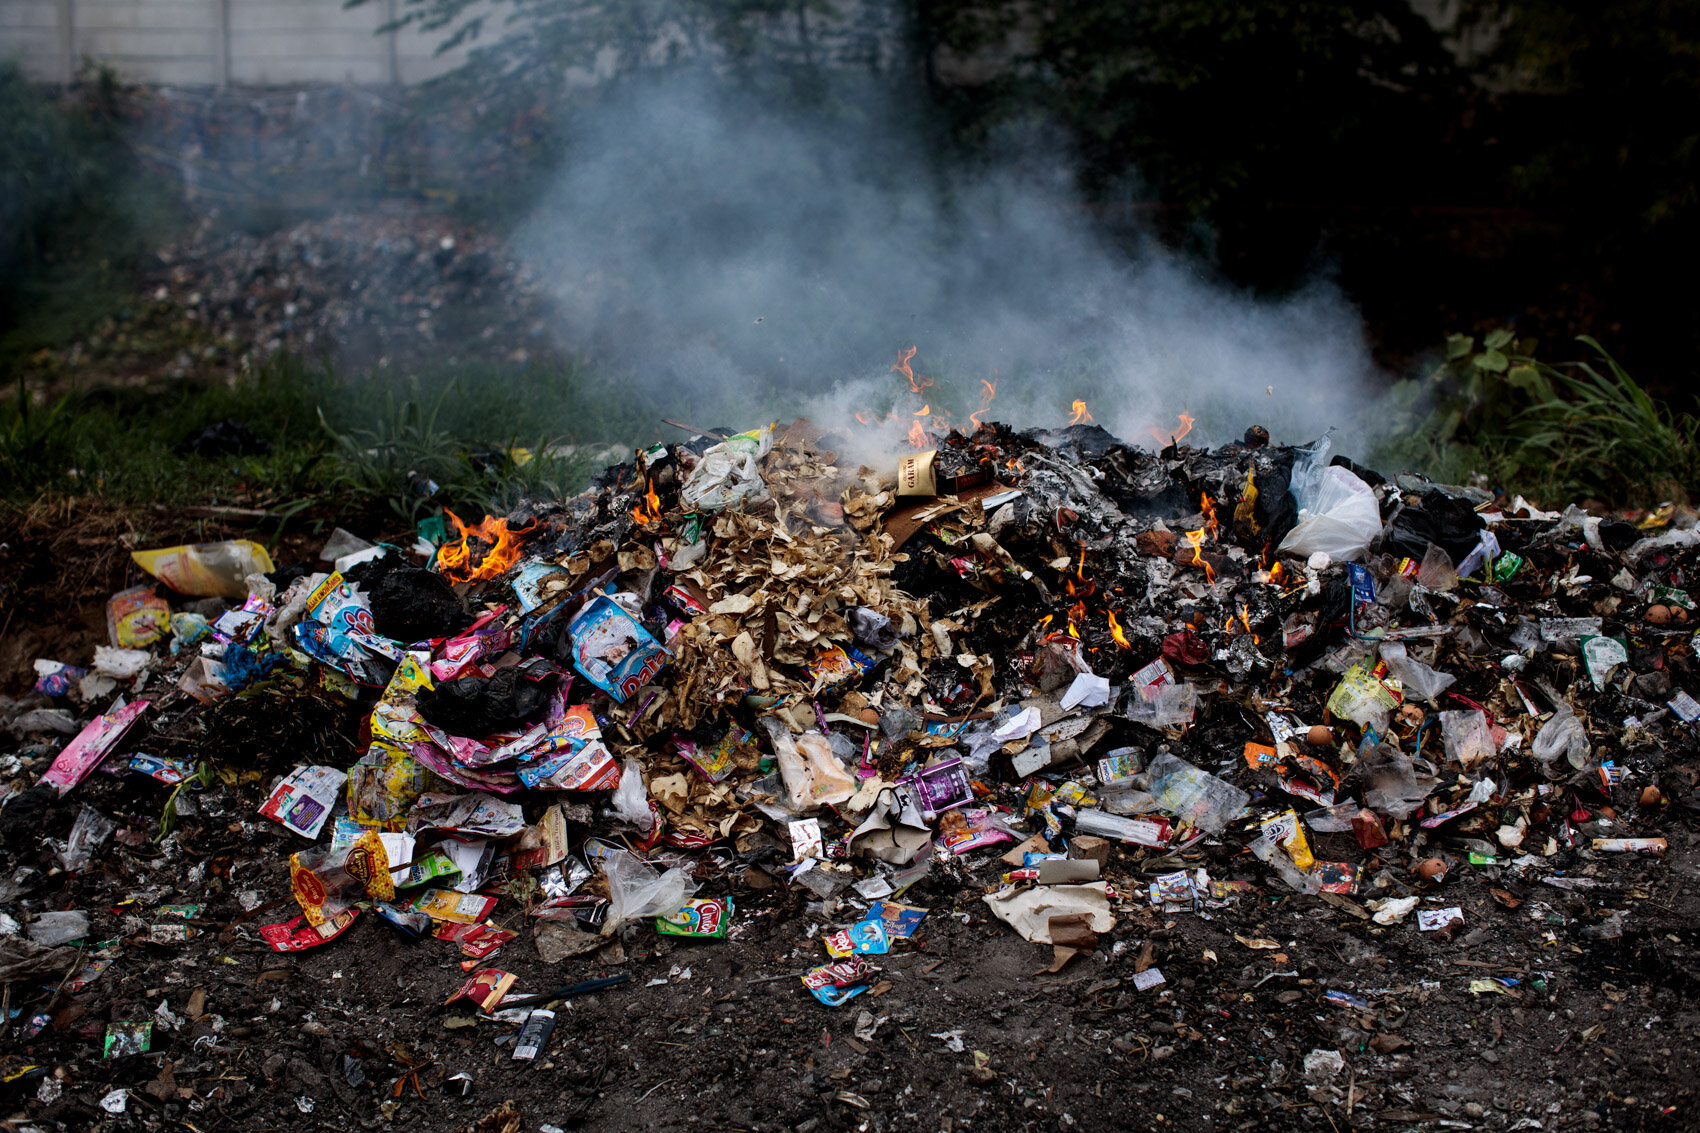  BANDUNG, INDONESIA: Garbage from Majalaya Village is burnt on the edge of the Citarum as there are no proper refuse facilities in the village on November 23rd, 2019, Java, Indonesia. 